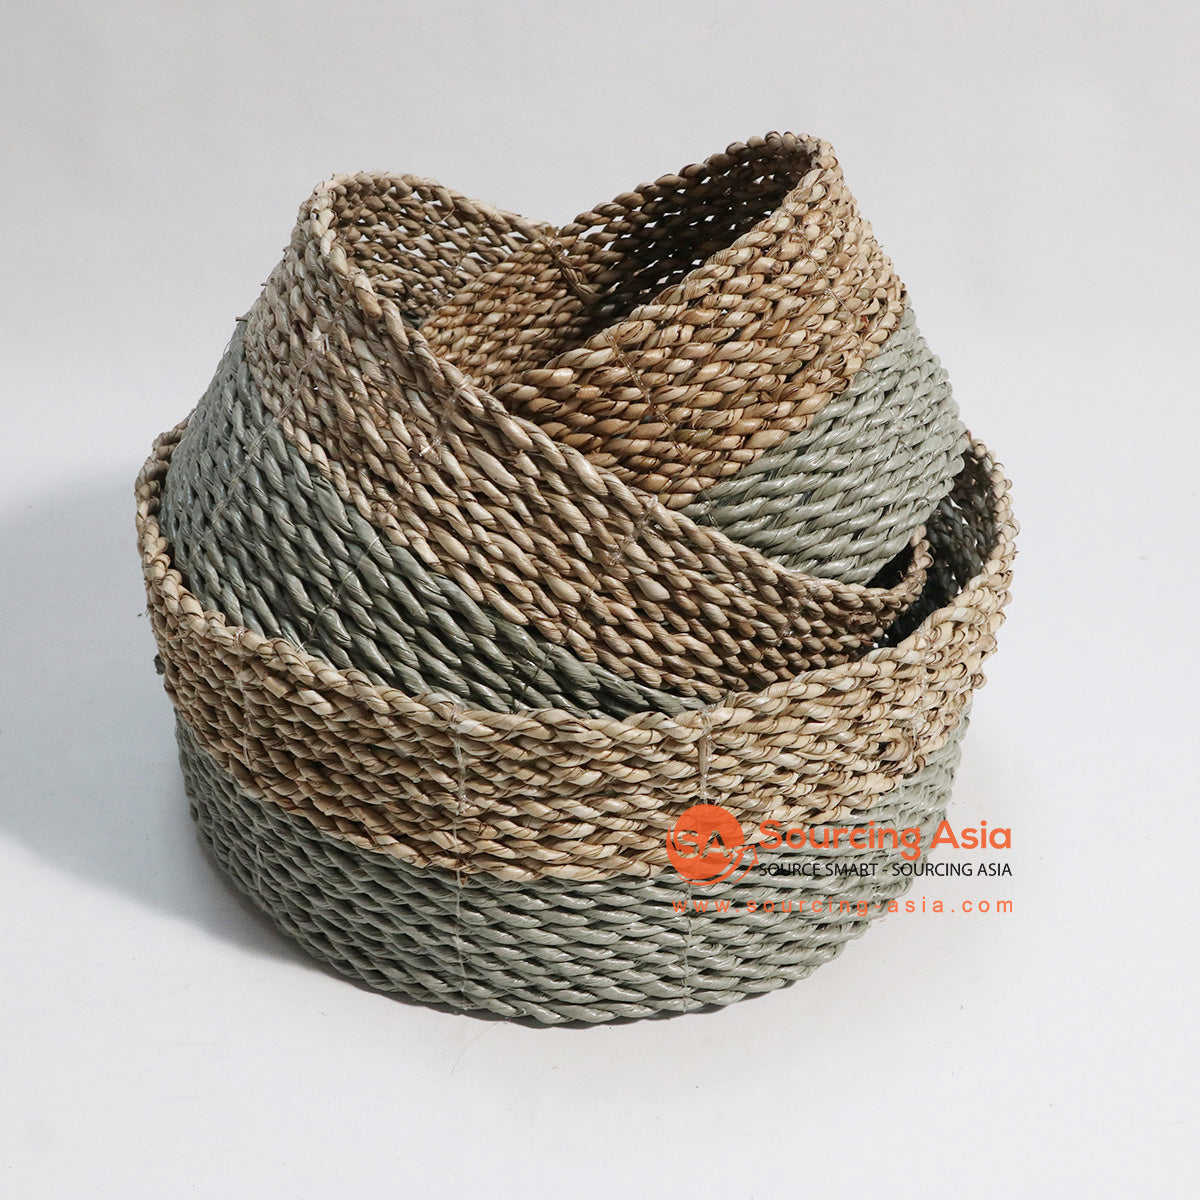 HBSC051 SET OF THREE NATURAL AND GREEN ROUND BASKETS